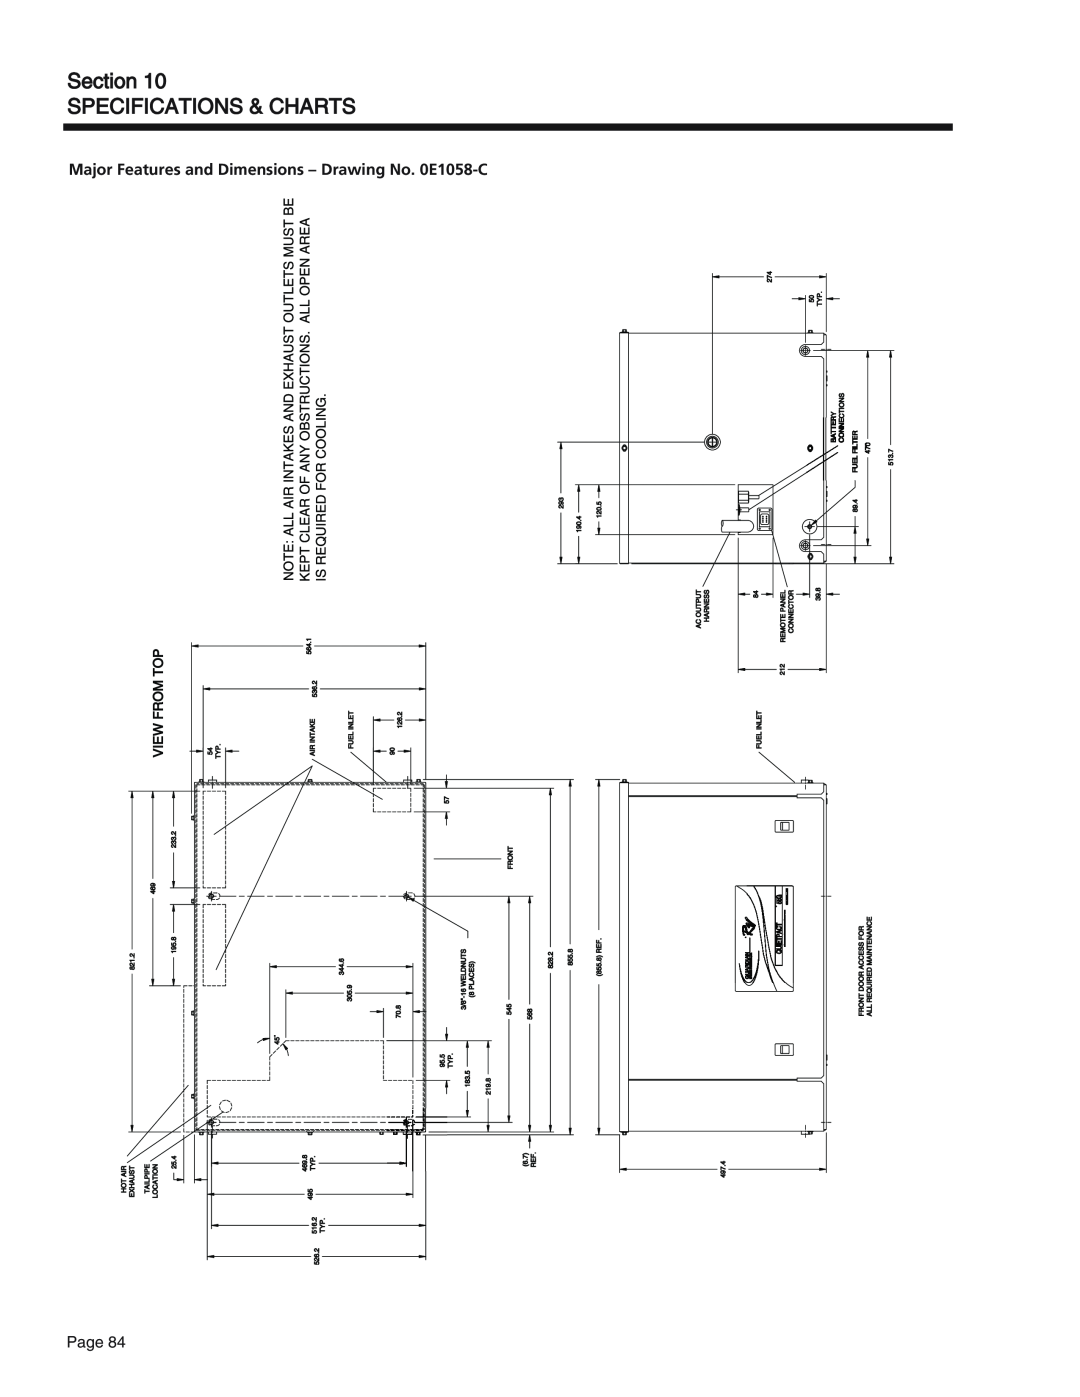 Generac Power Systems 65, 55, 75 manual Section SPECIFICATIONS & CHARTS 